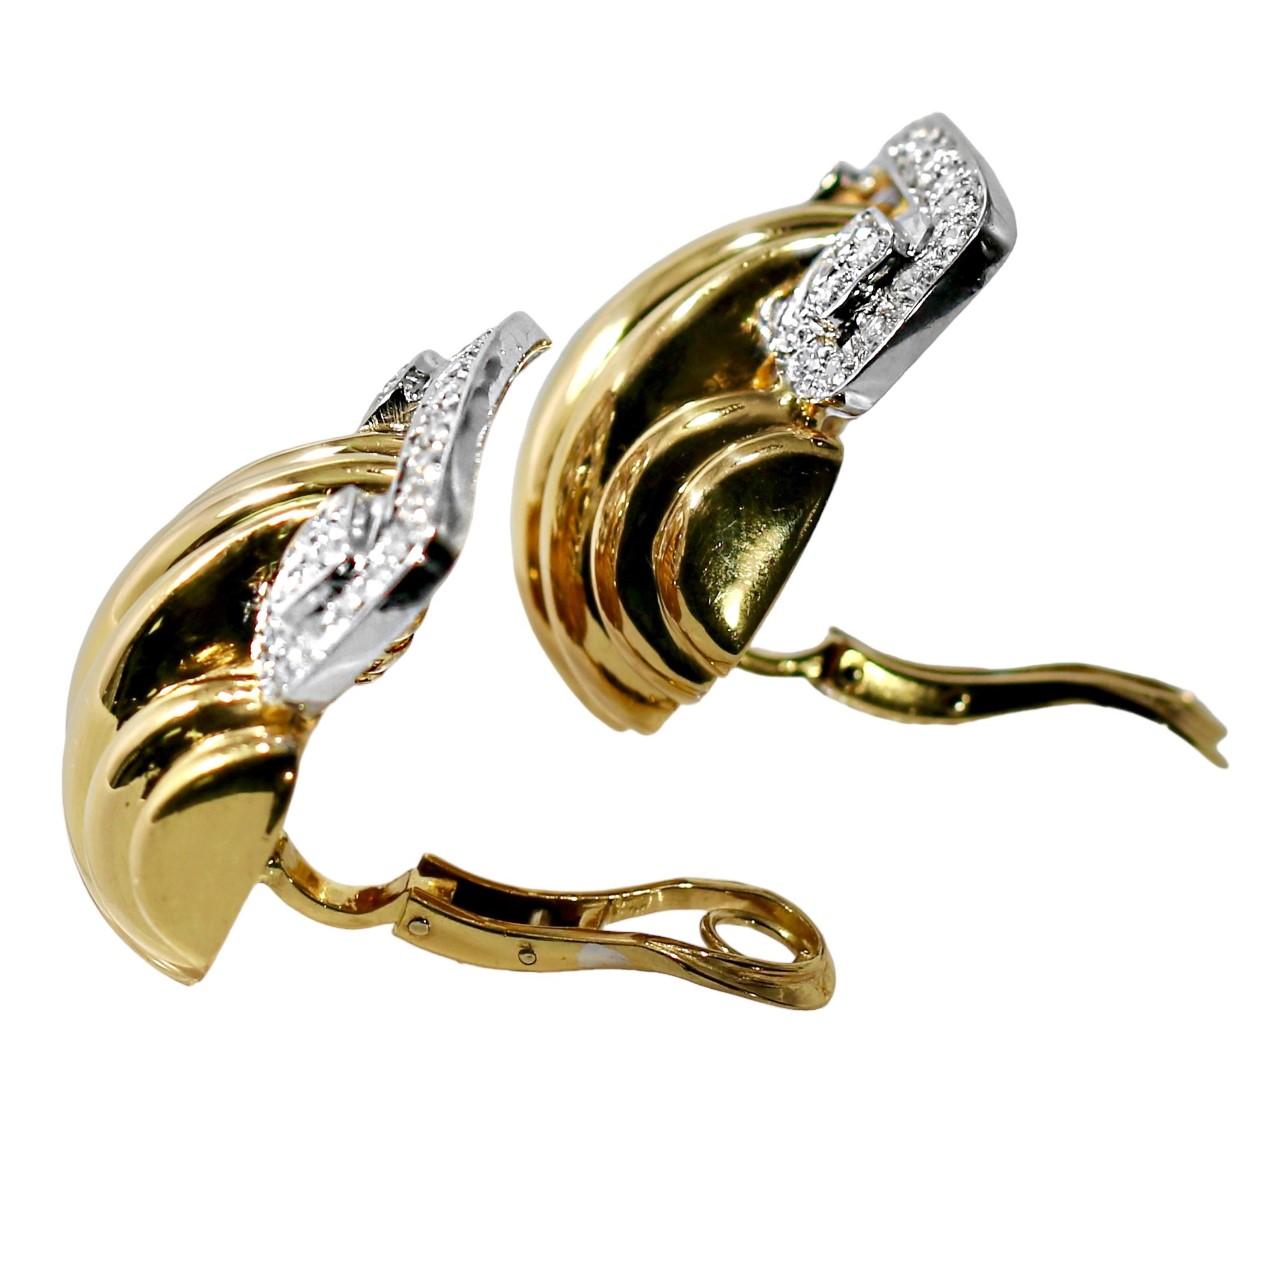 Brilliant Cut Elegant Vintage 18k Yellow and White Gold Diamond Set Scroll Top Earrings For Sale